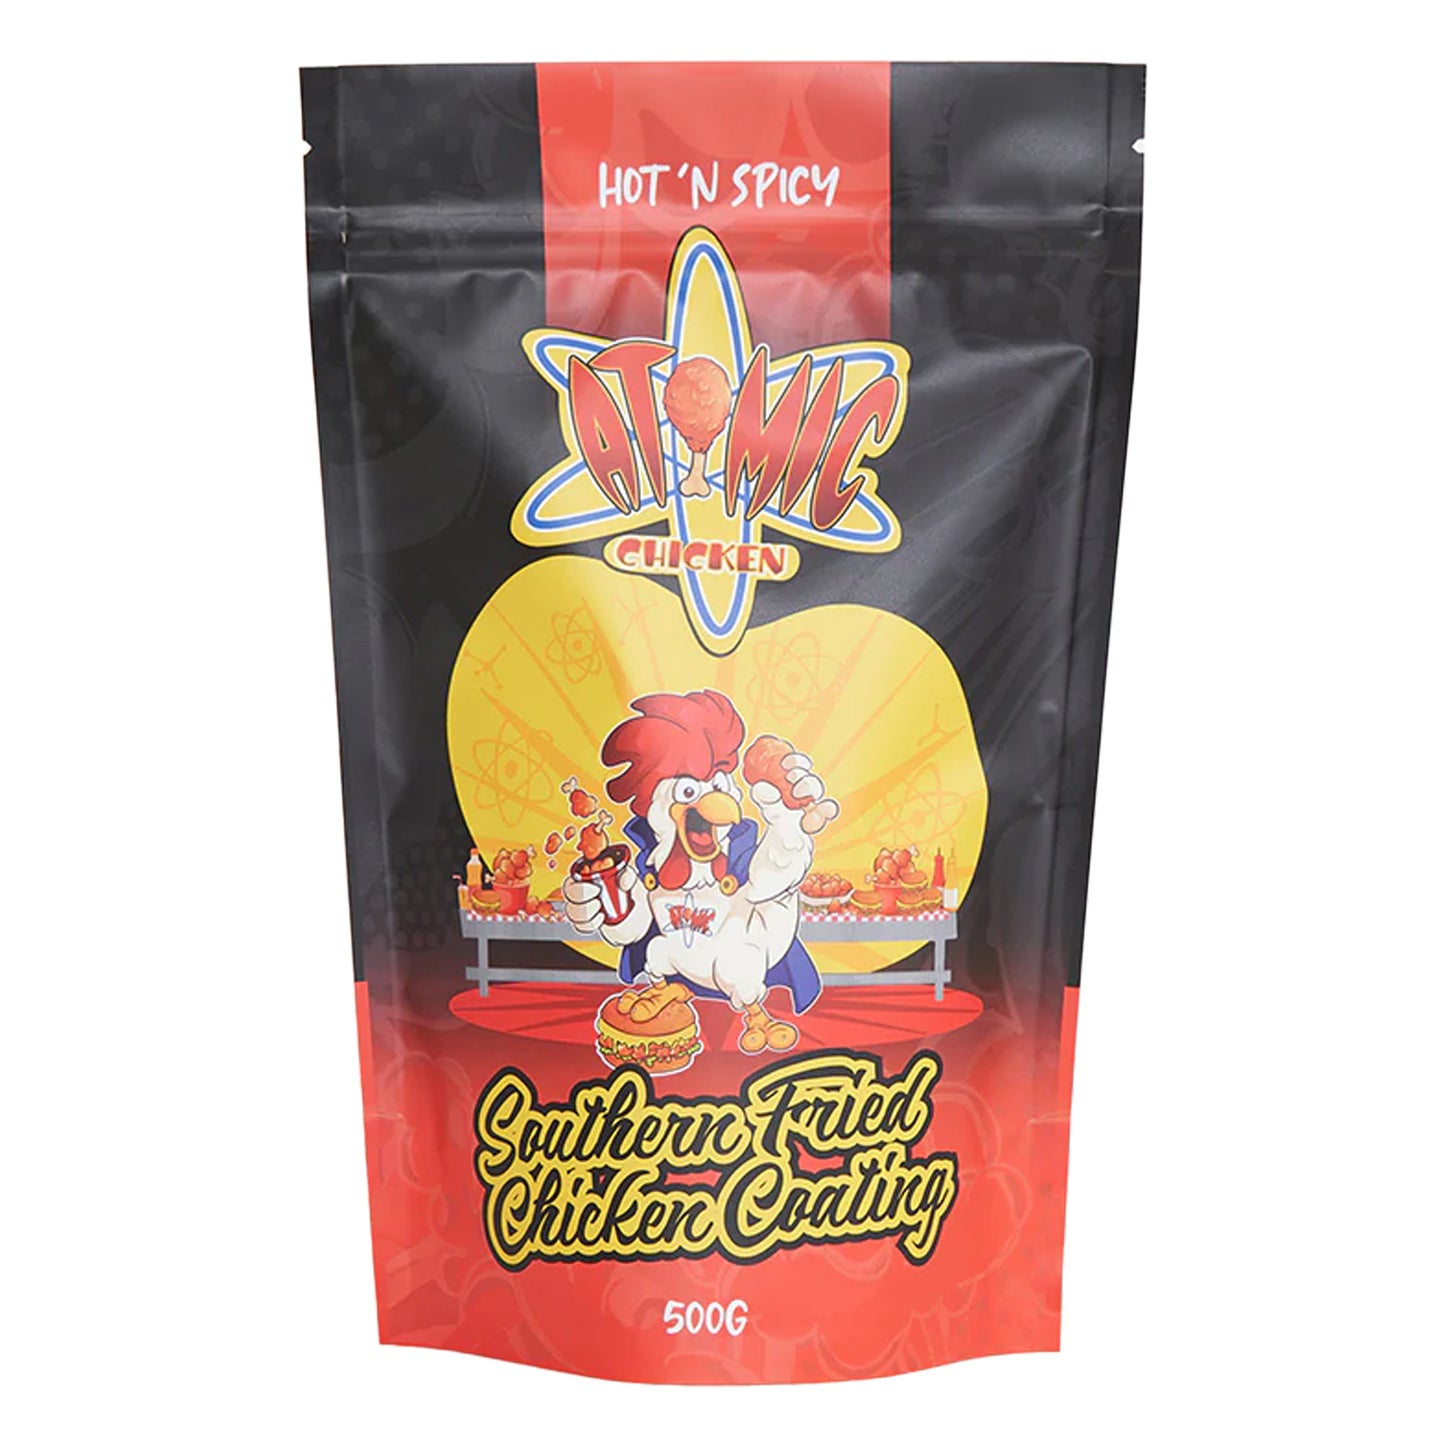 Hot ‘N Spicy Southern Fried Chicken Coating